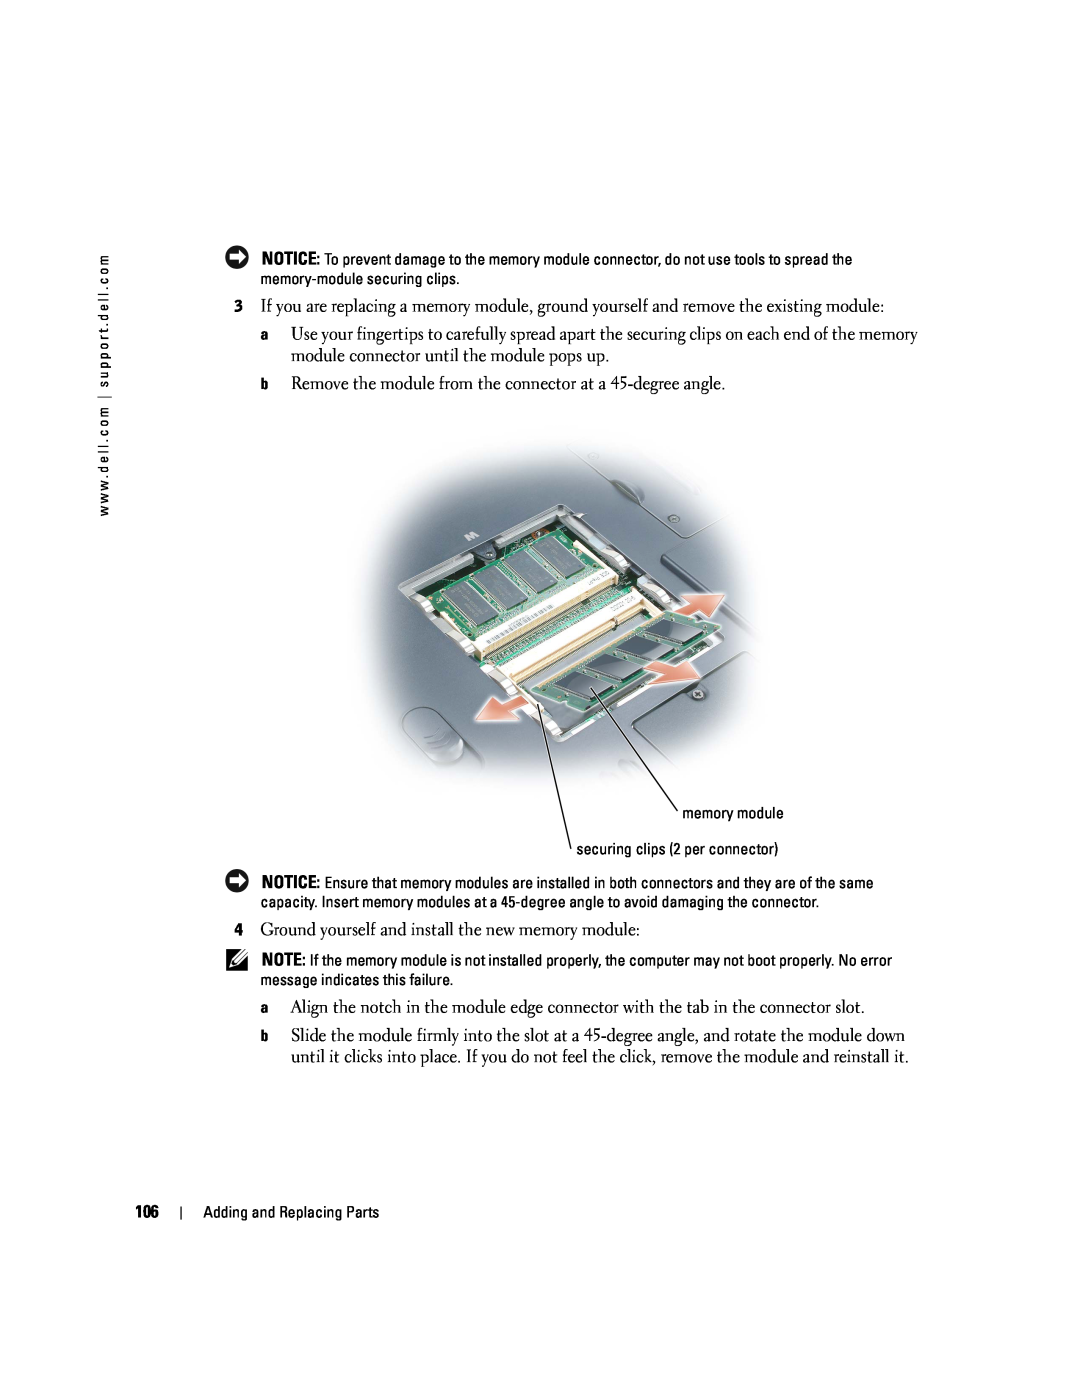 Dell PP09L owner manual b Remove the module from the connector at a 45-degree angle 